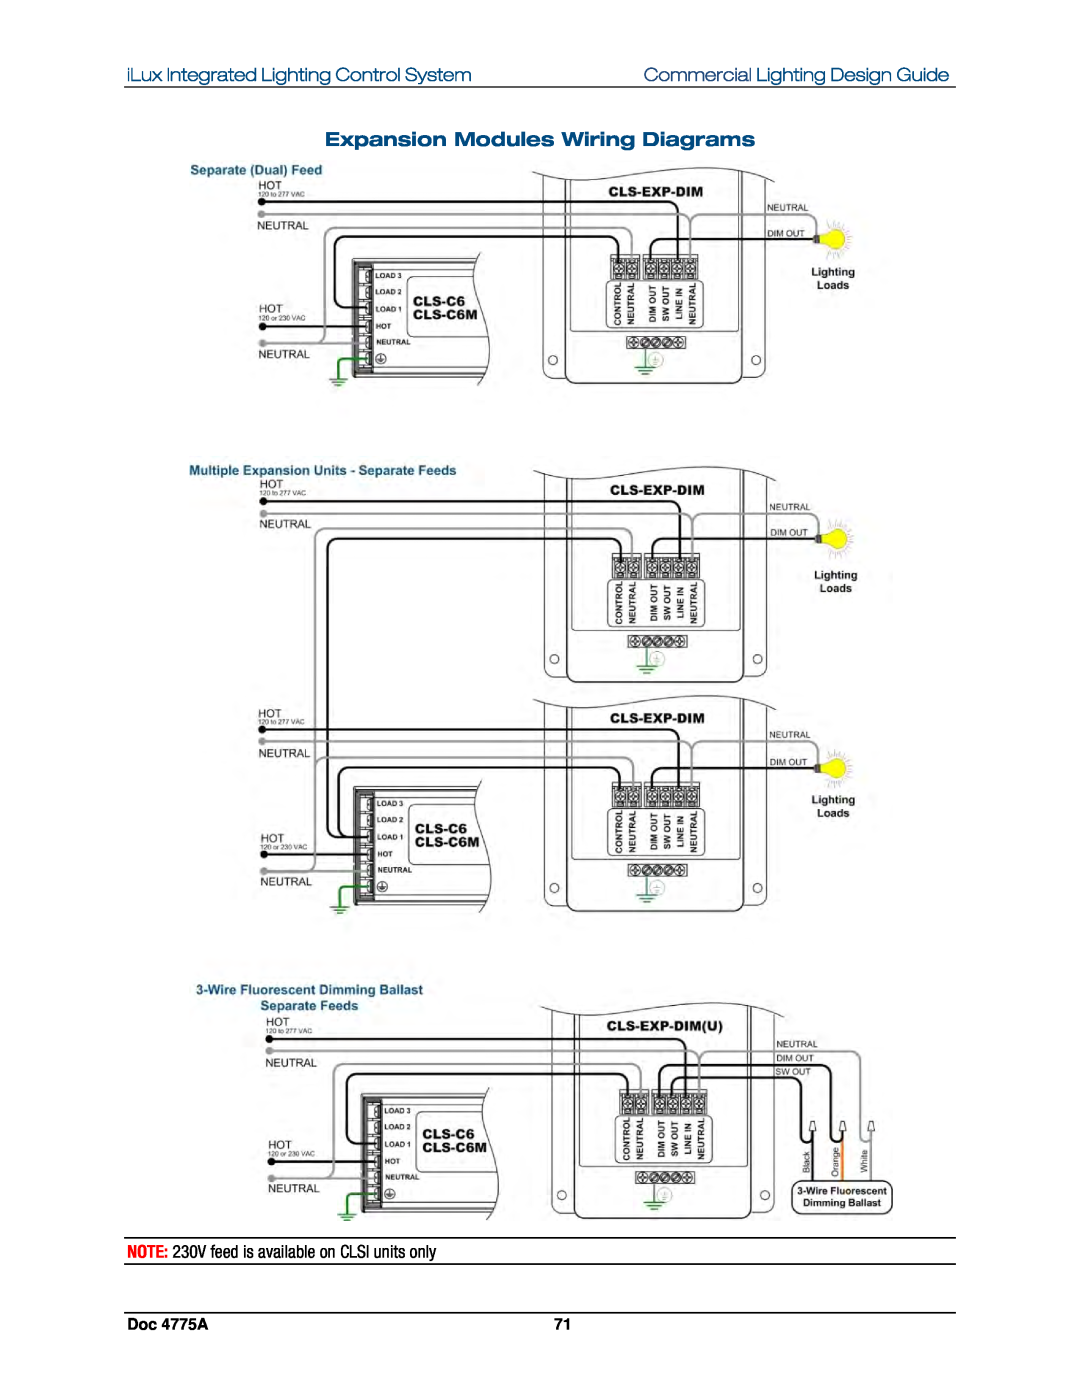 Crestron electronic GLPS-HSW manual Expansion Modules Wiring Diagrams, iLux Integrated Lighting Control System, Doc 4775A 